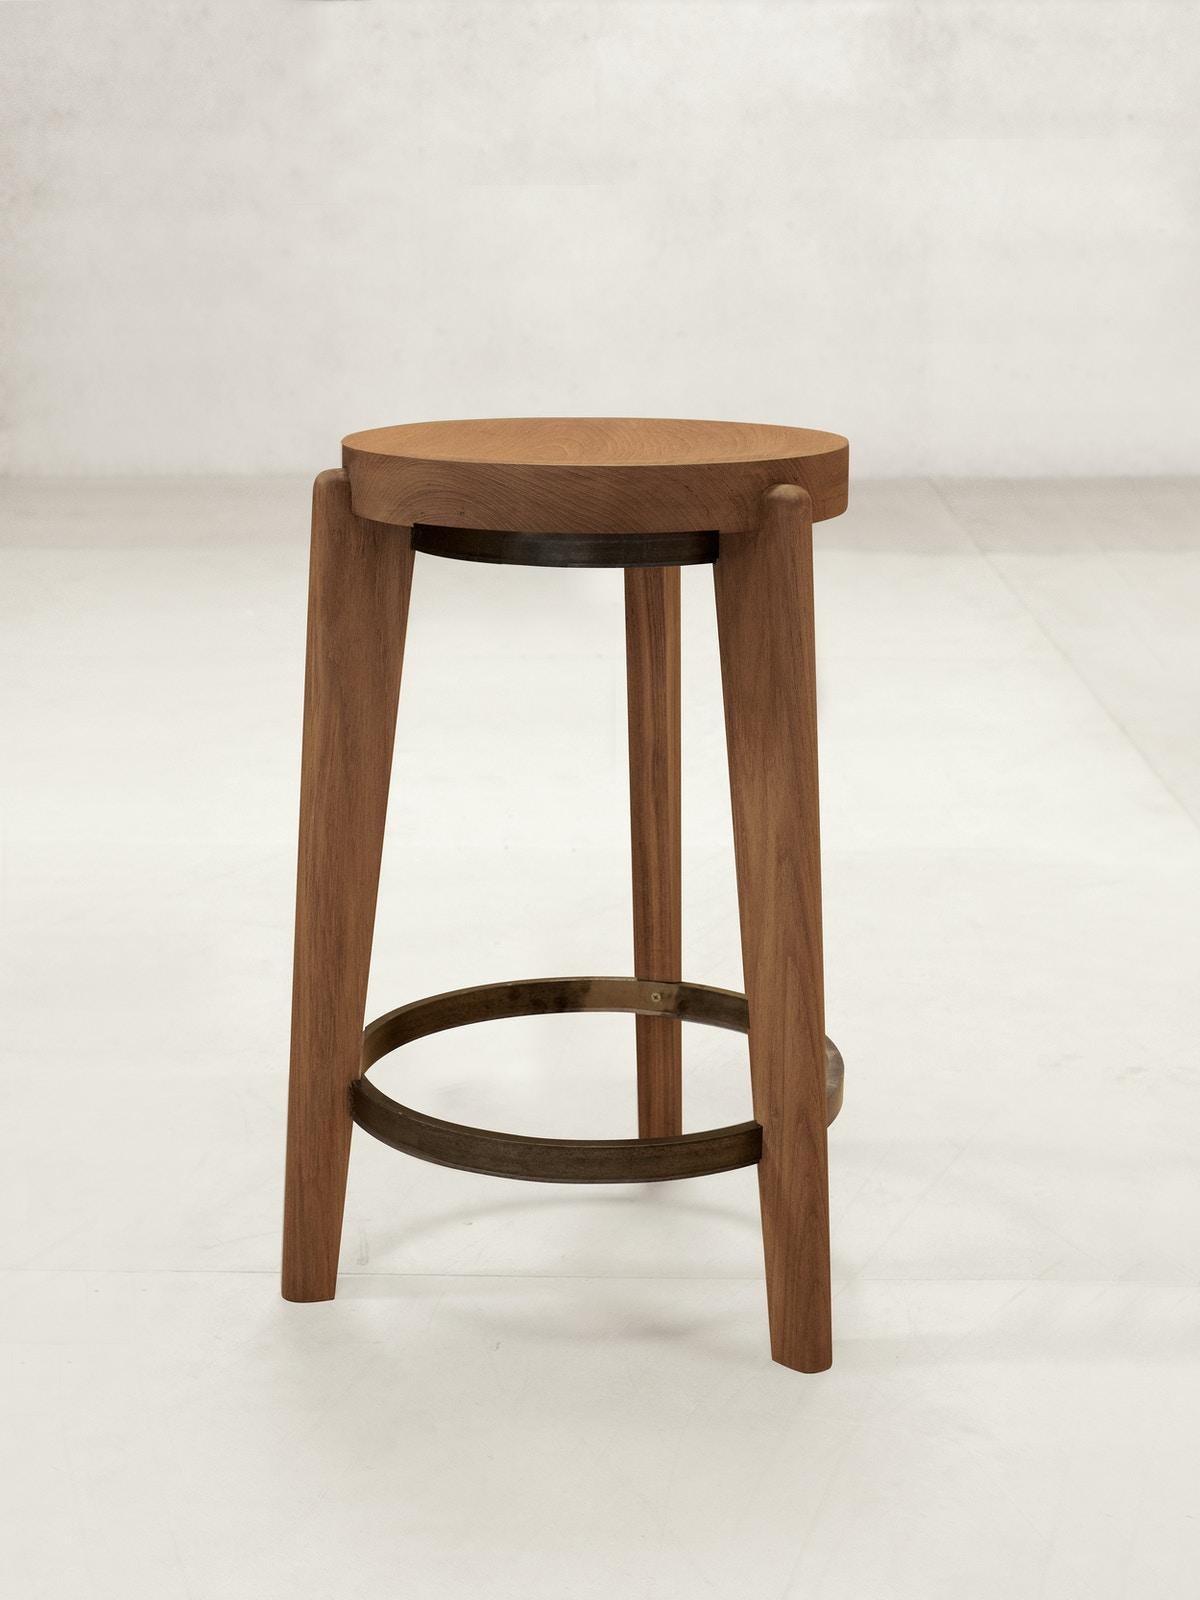 21st Century designed counter stool teak wood brown metal.

The counter stool or round stool has a solid teak seat with two metal rings - one at the foot of the stool and a smaller ring supporting the seat. The seat is gently hollowed to make